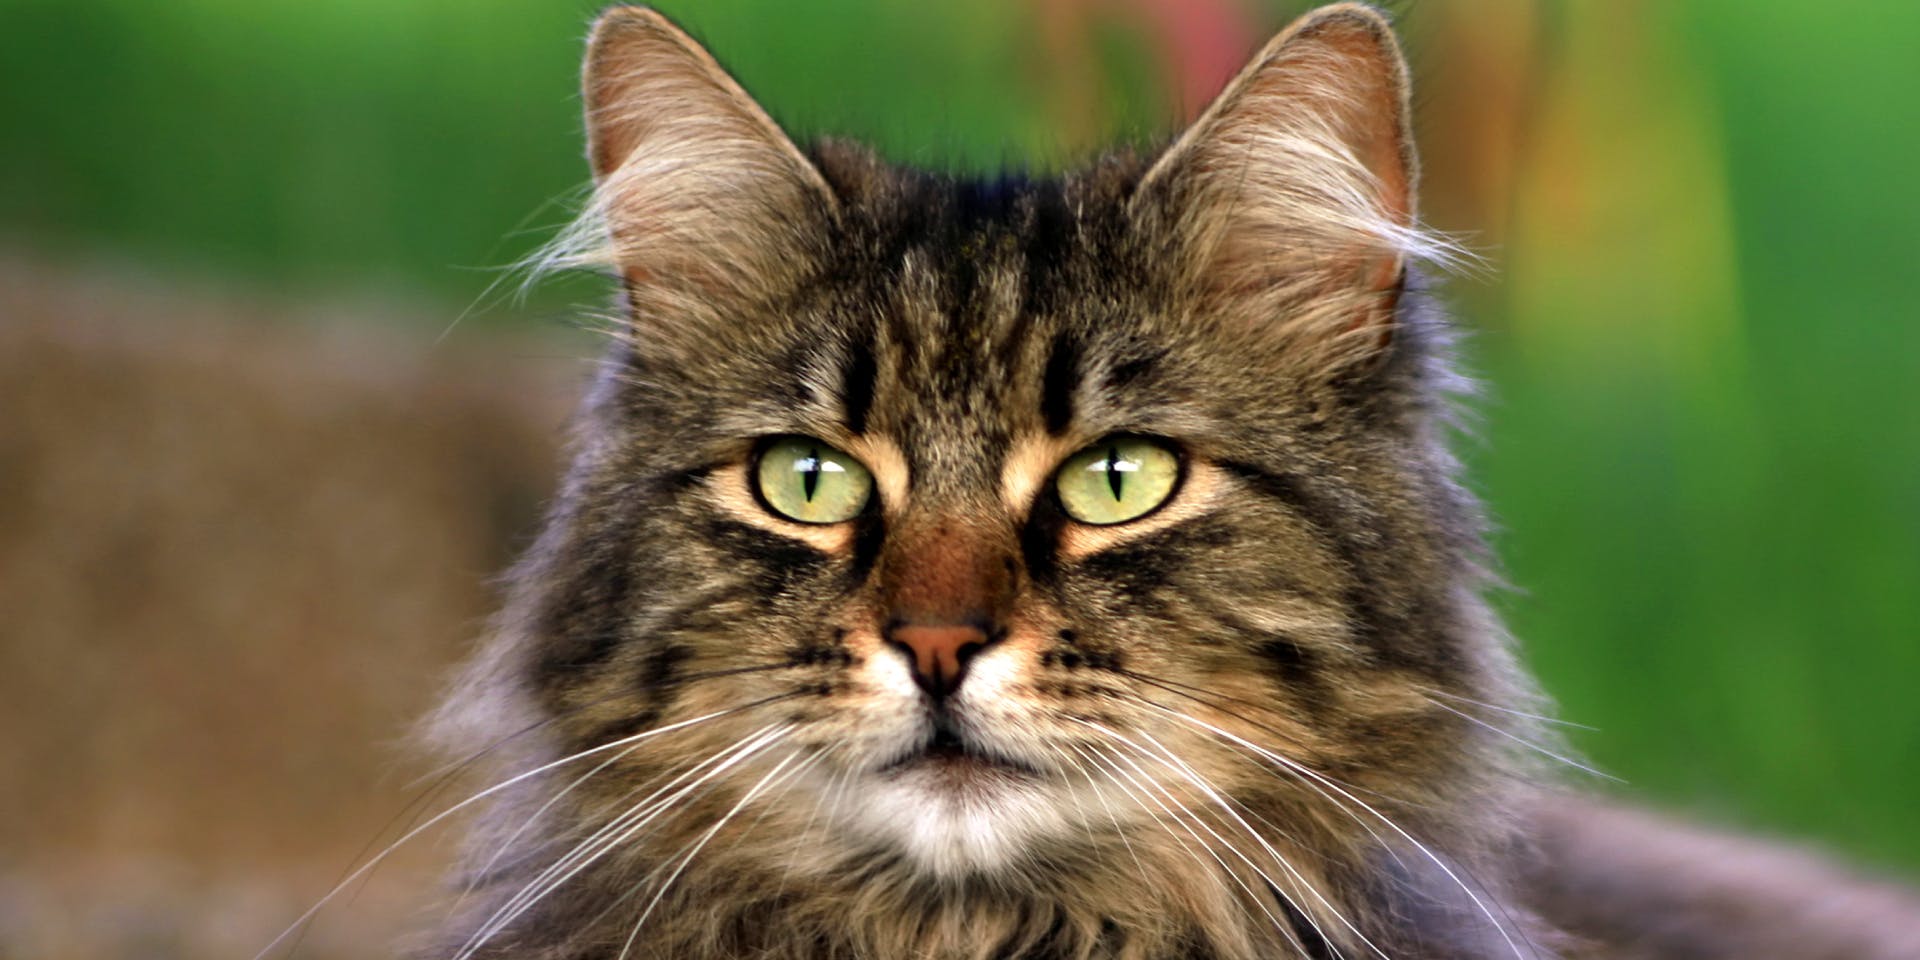 A Maine Coon cat with light green eyes.